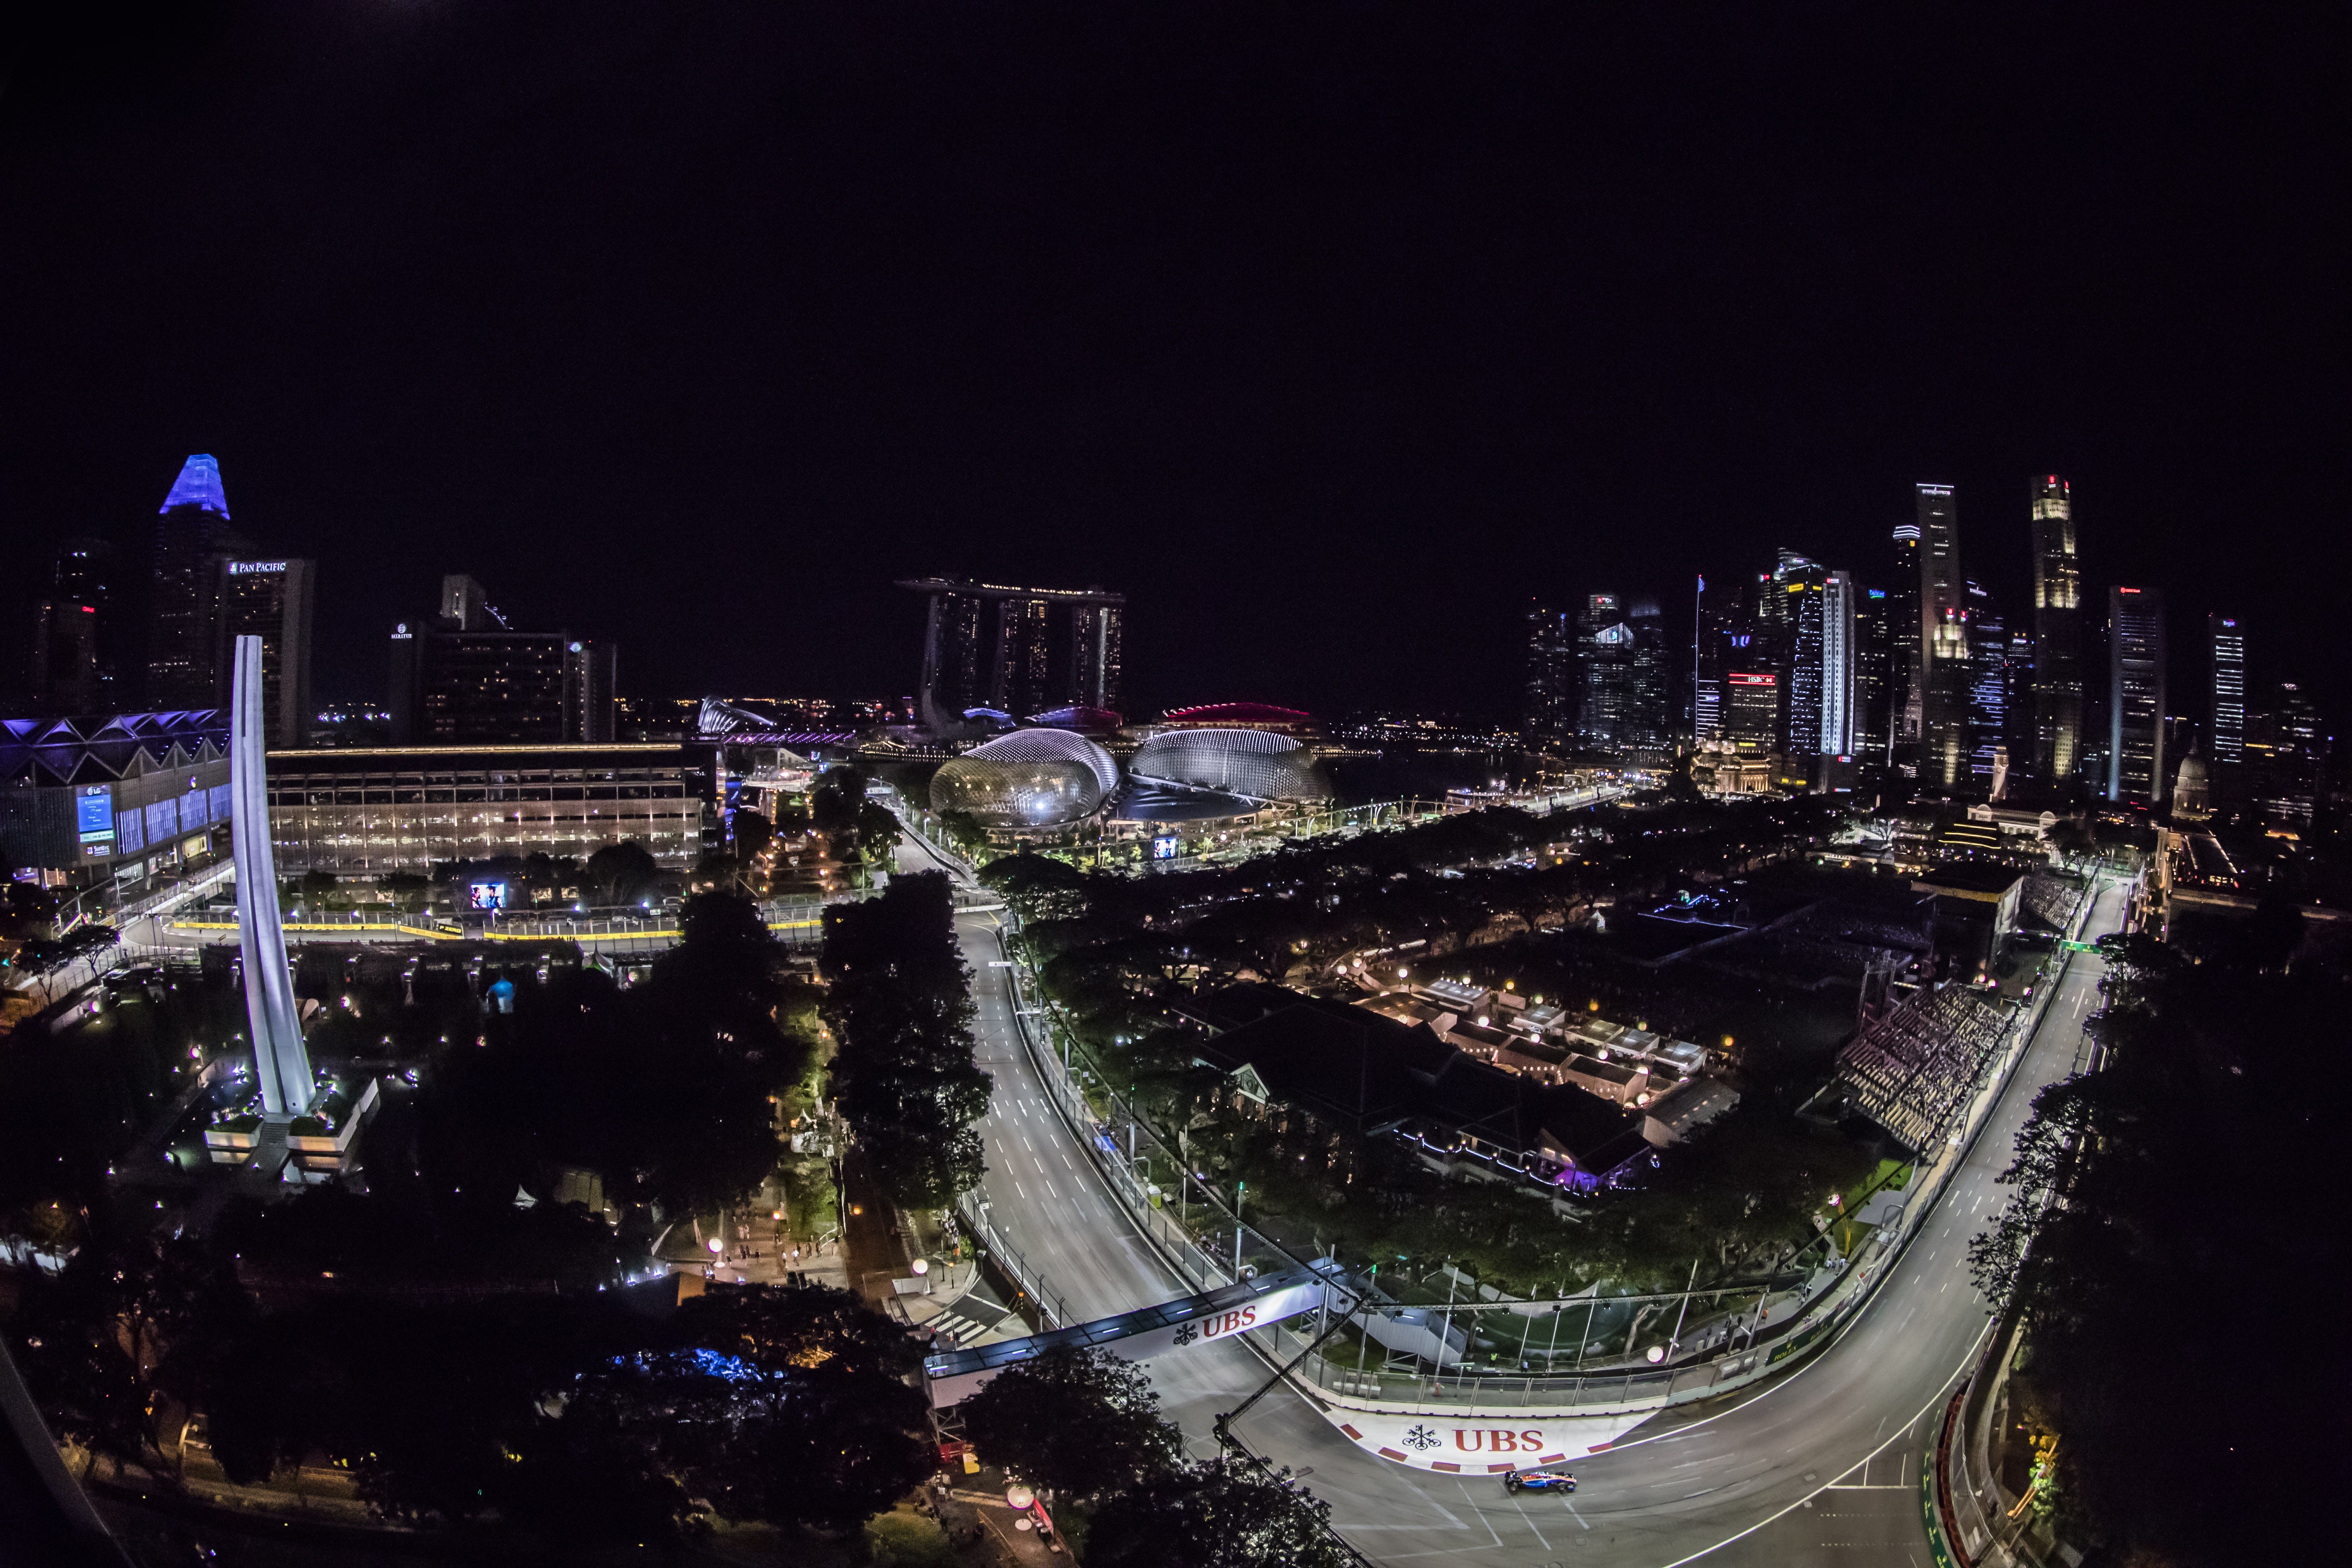 The Formula One Singapore Grand Prix dominates the night sky, with a view of Padang and Turn 9 at Marina Bay Street Circuit.